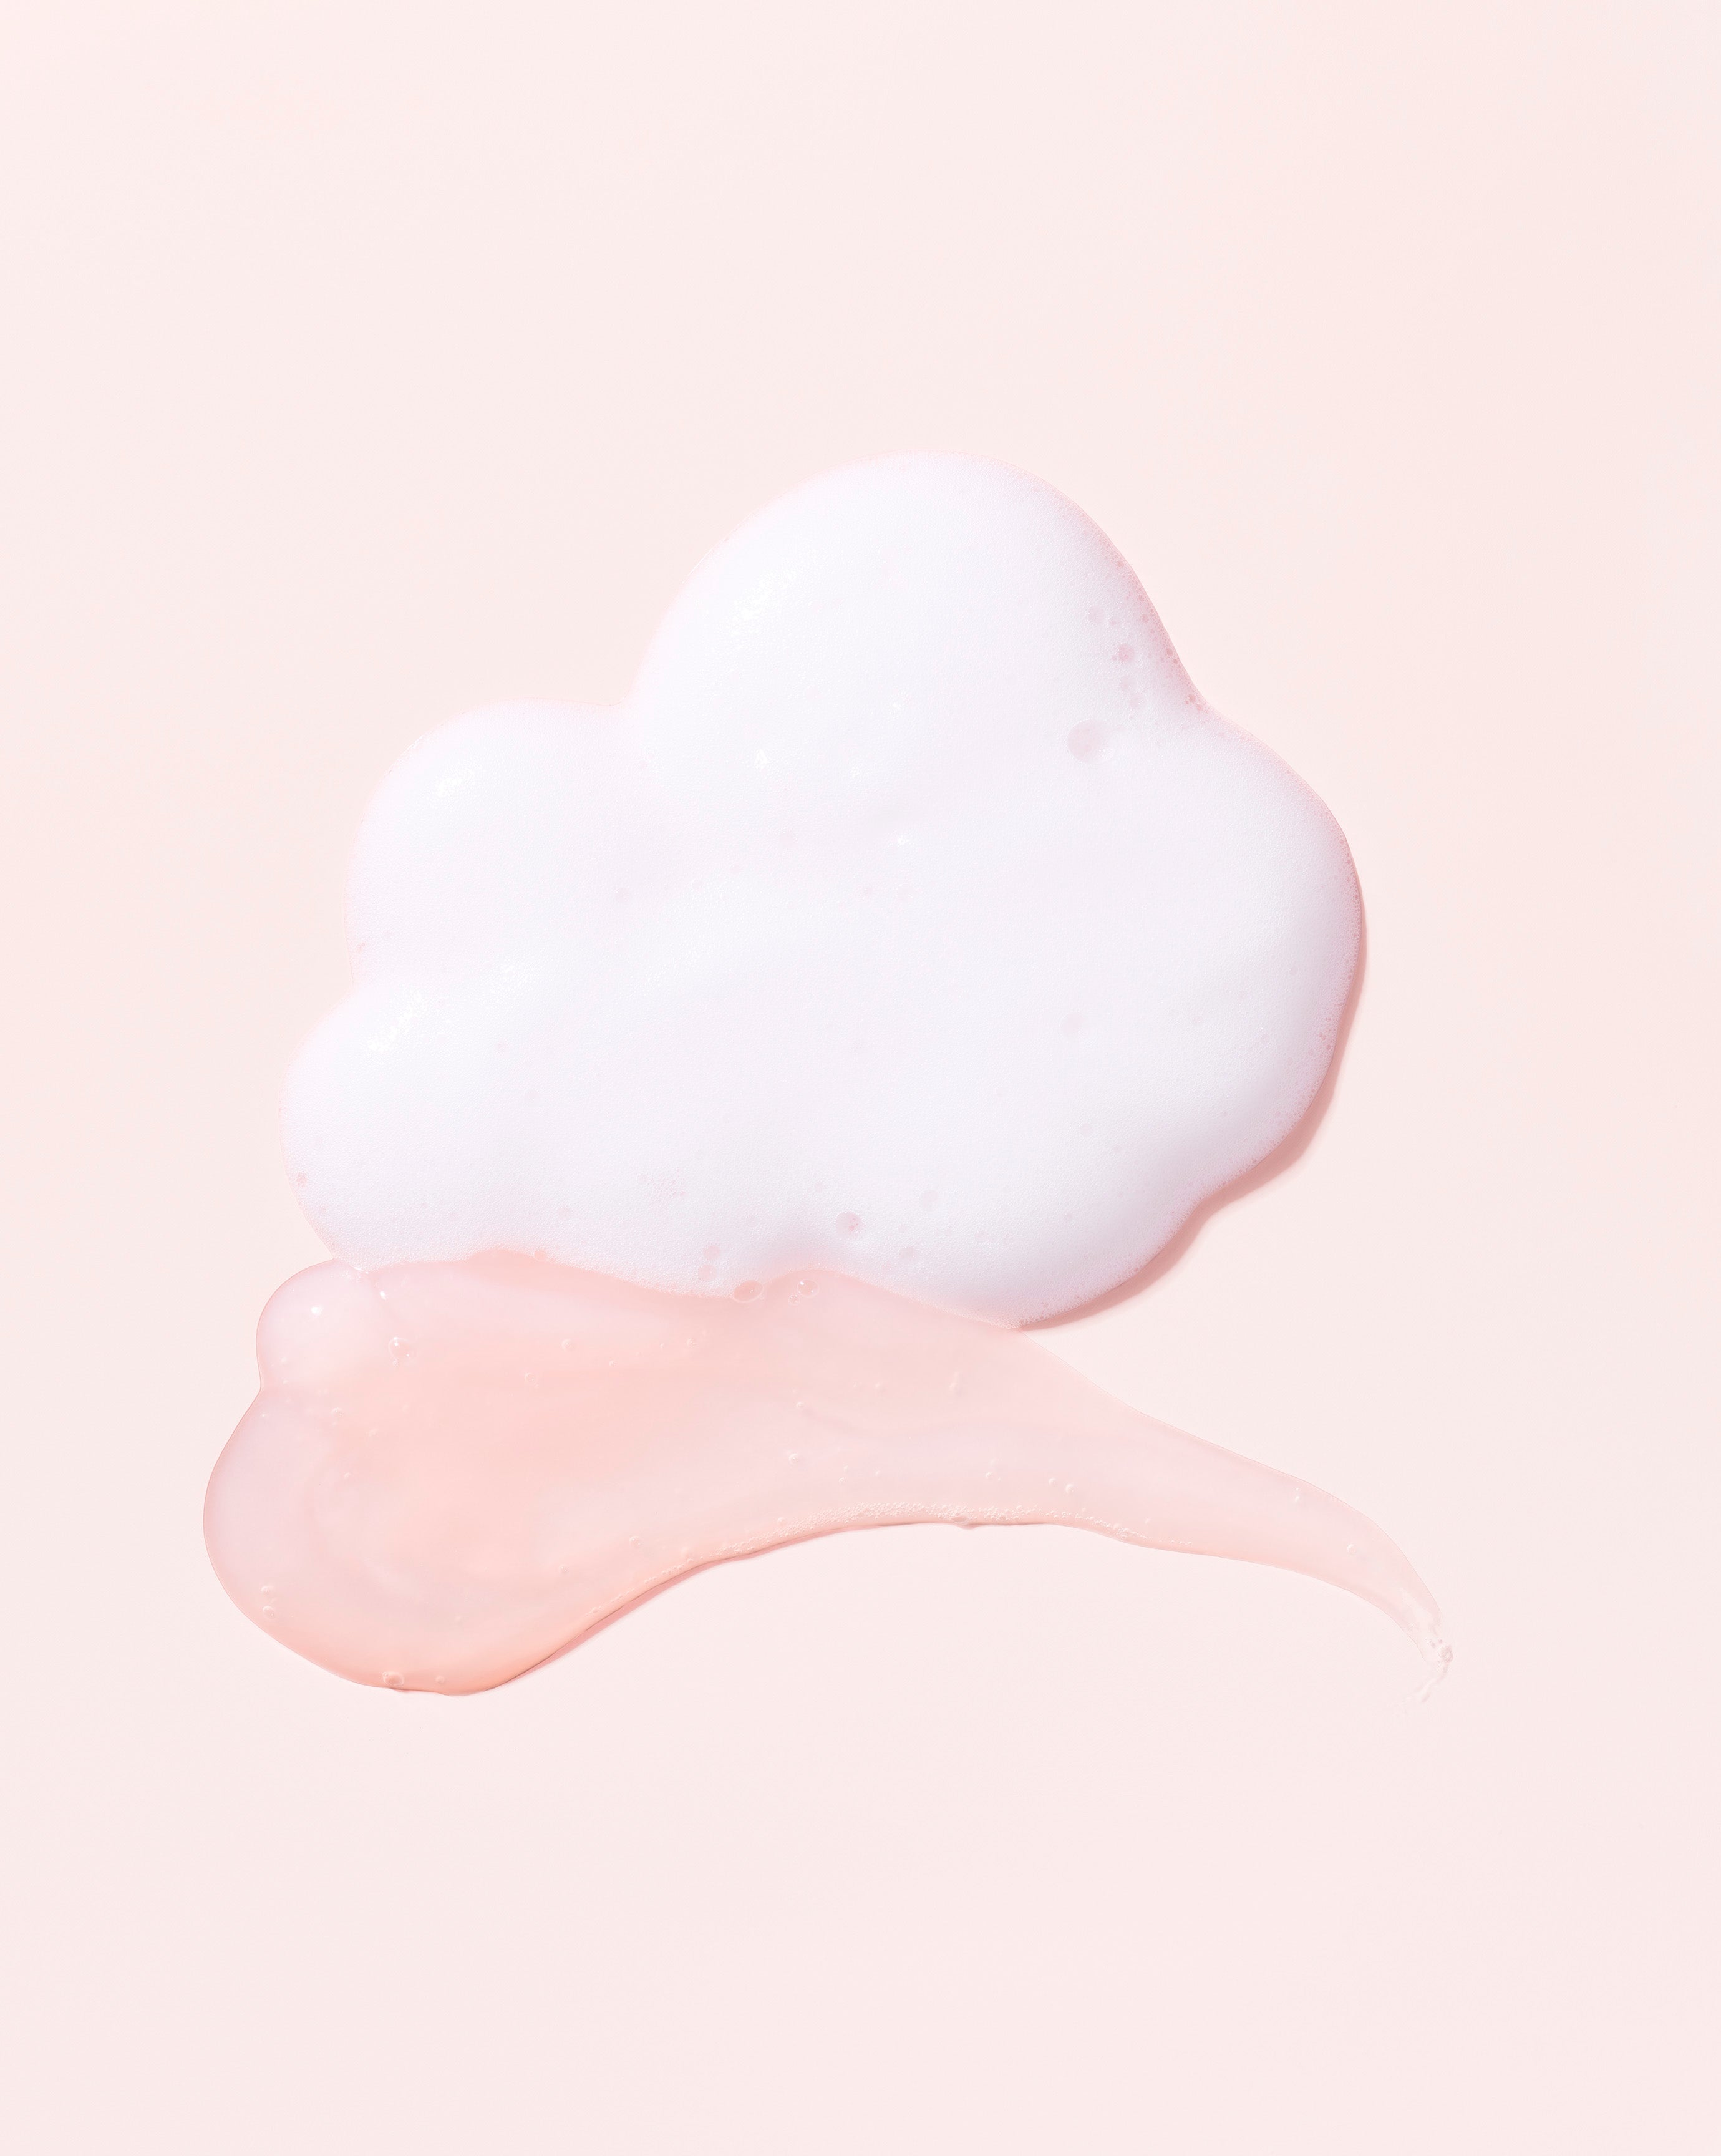 PINK CLOUD Rosewater + Tremella Creamy Jelly Cleanser | Packette